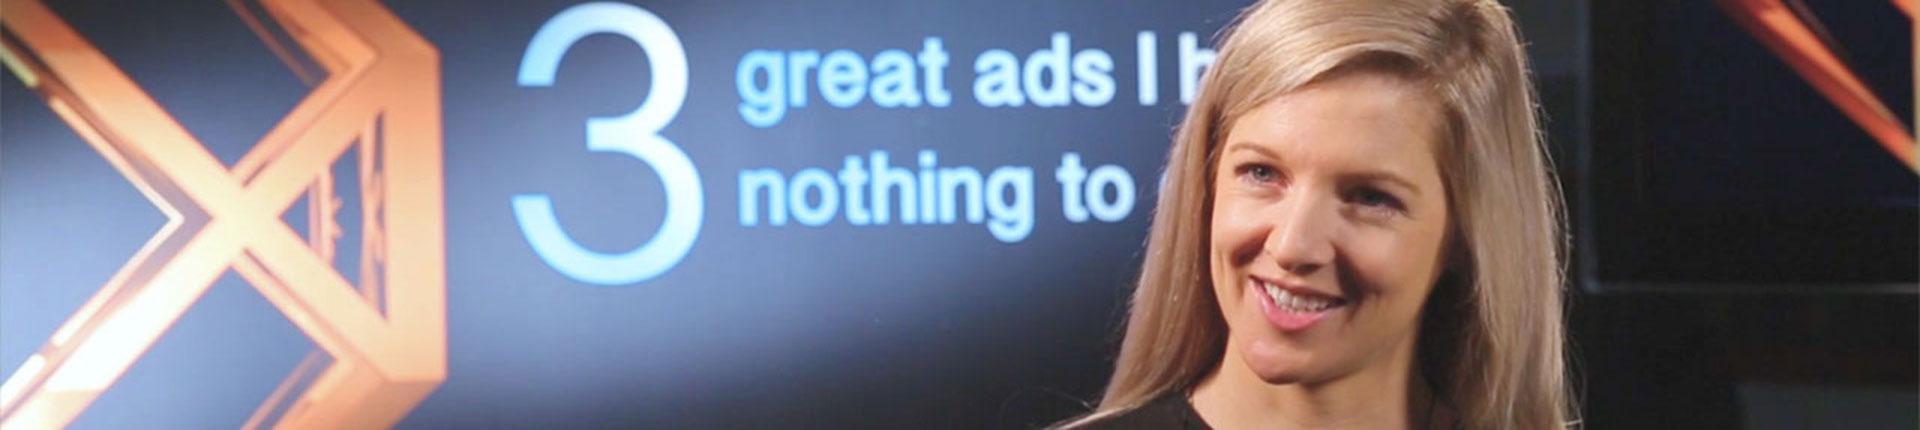 3 great ads I had nothing to do with: Debs Gerrard